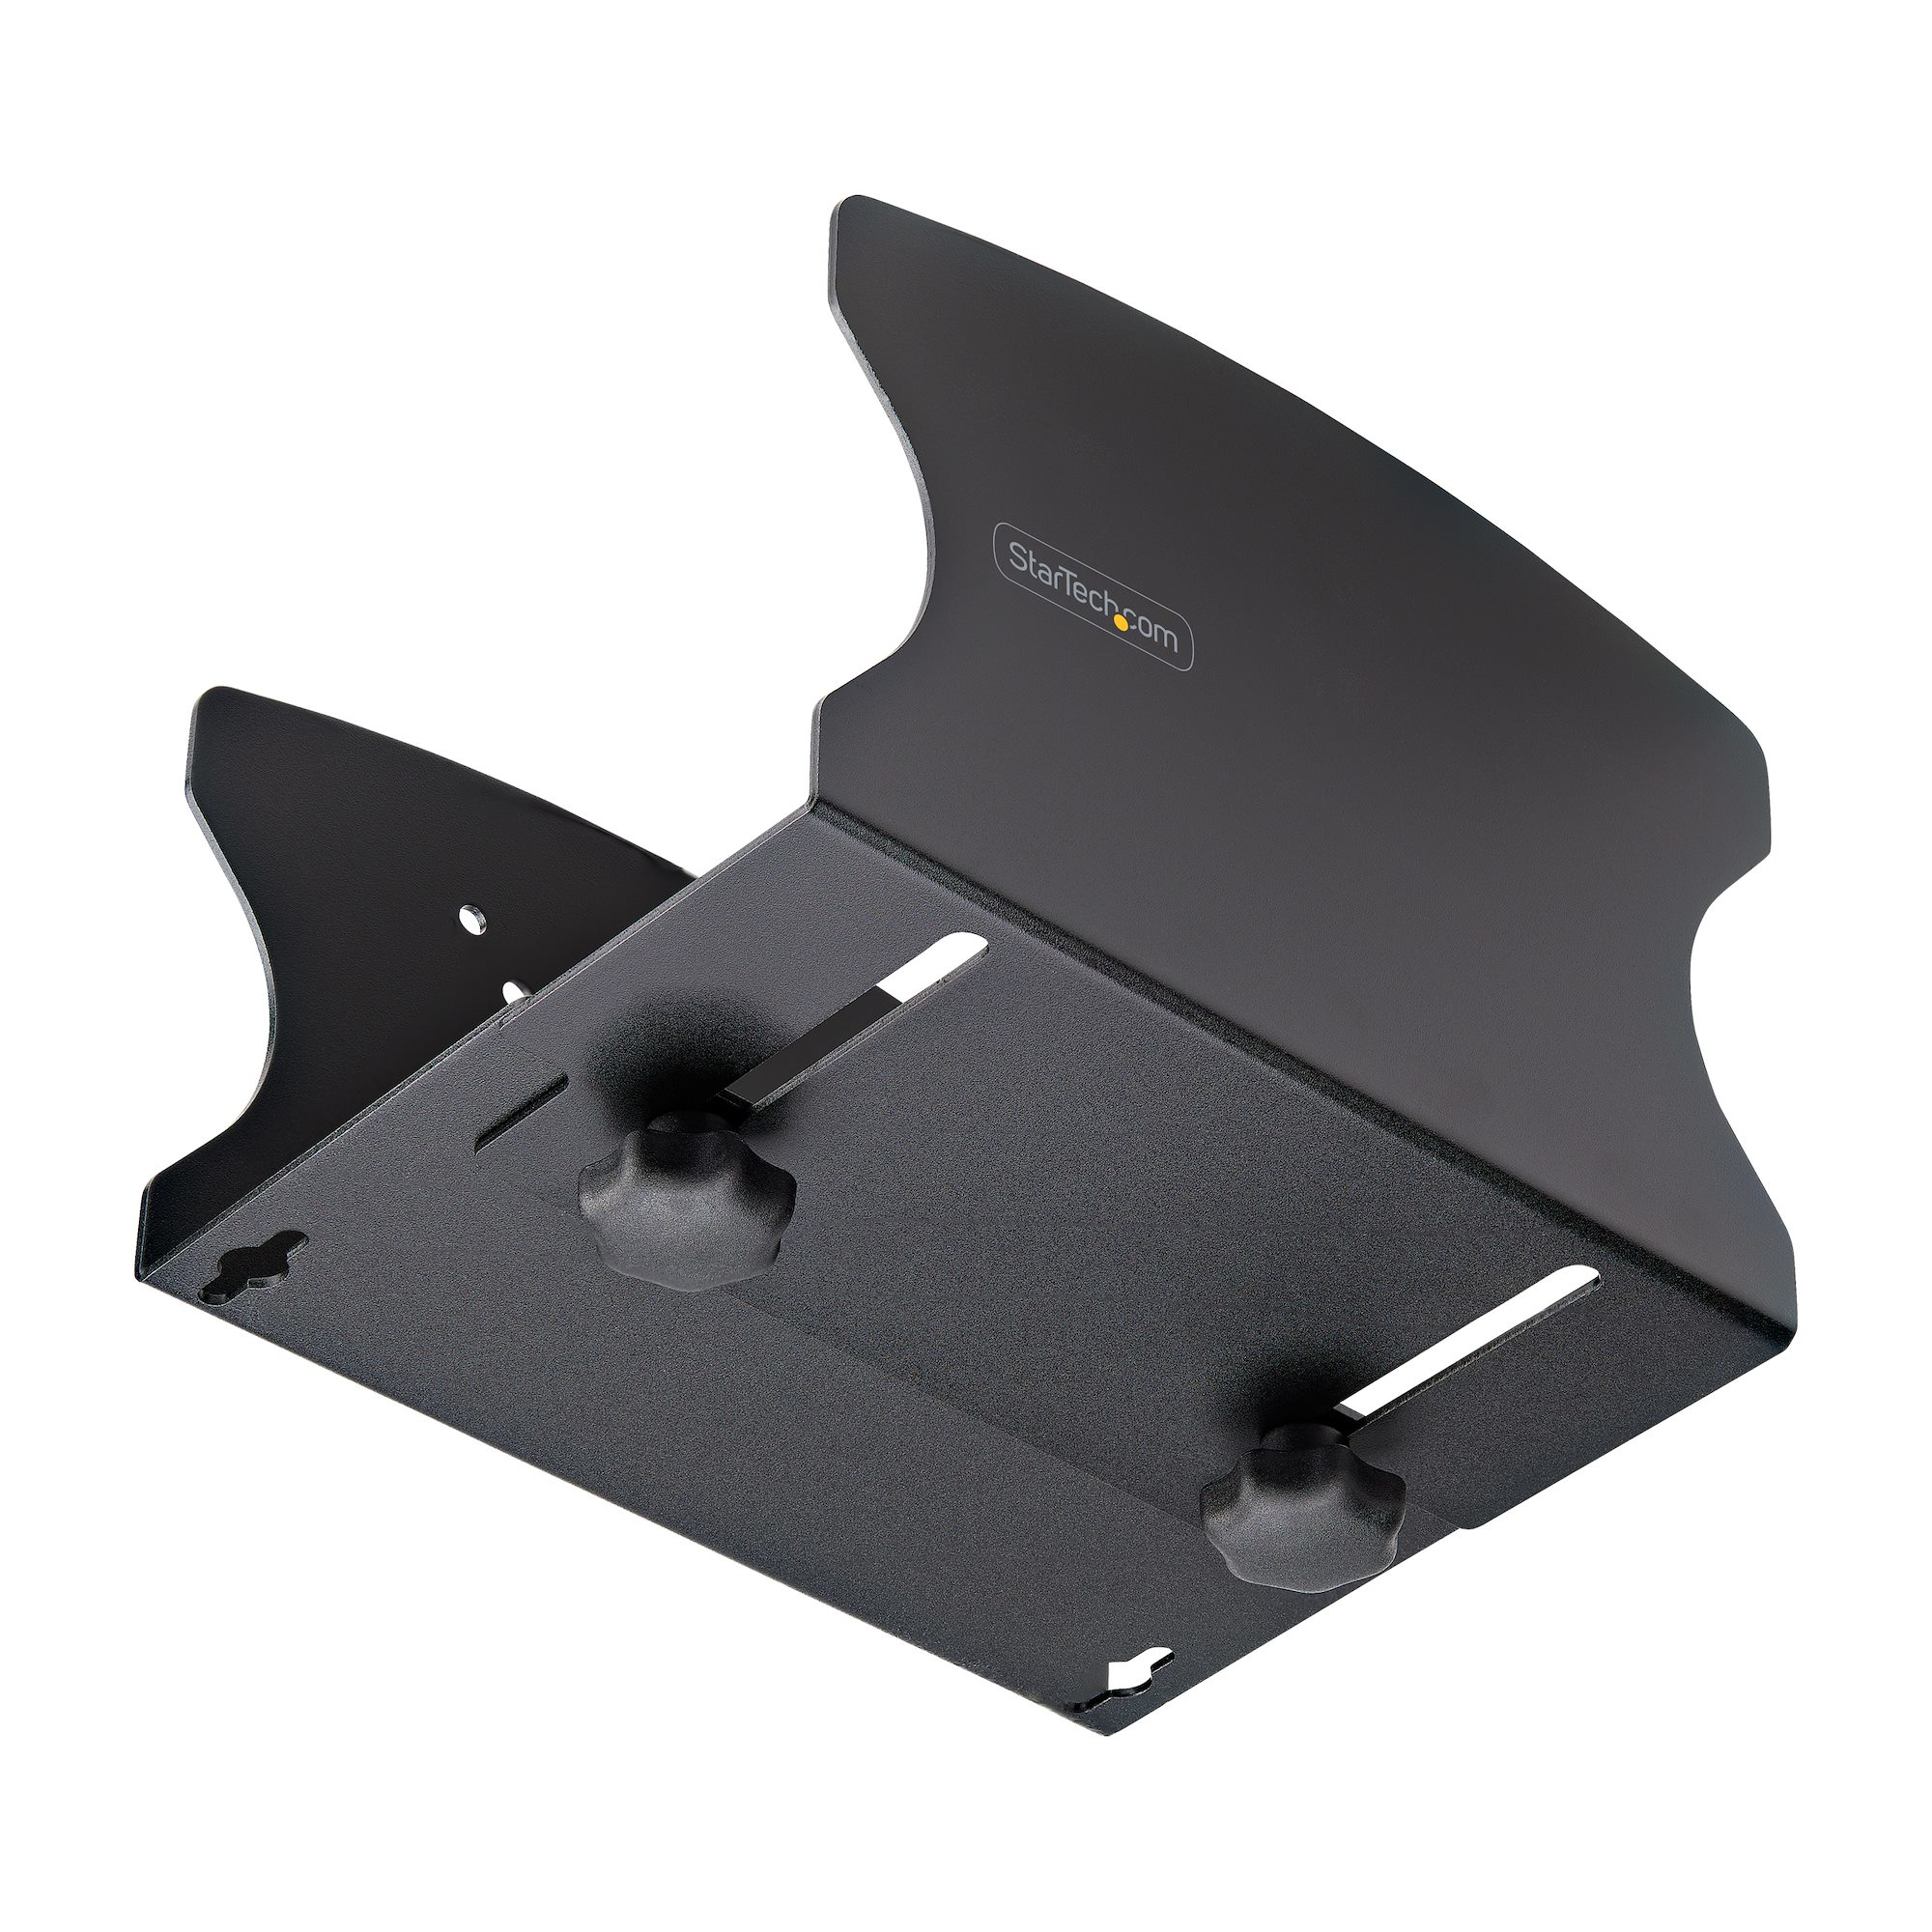 StarTech.com PC Wall Mount Bracket, Supports Desktop Computers Up To 40lb (18kg), Tool-Less Adjustments 1.9-7.8in (50-200mm), Heavy-Duty Wall Mount Shelf/Holder for PC Case/Tower